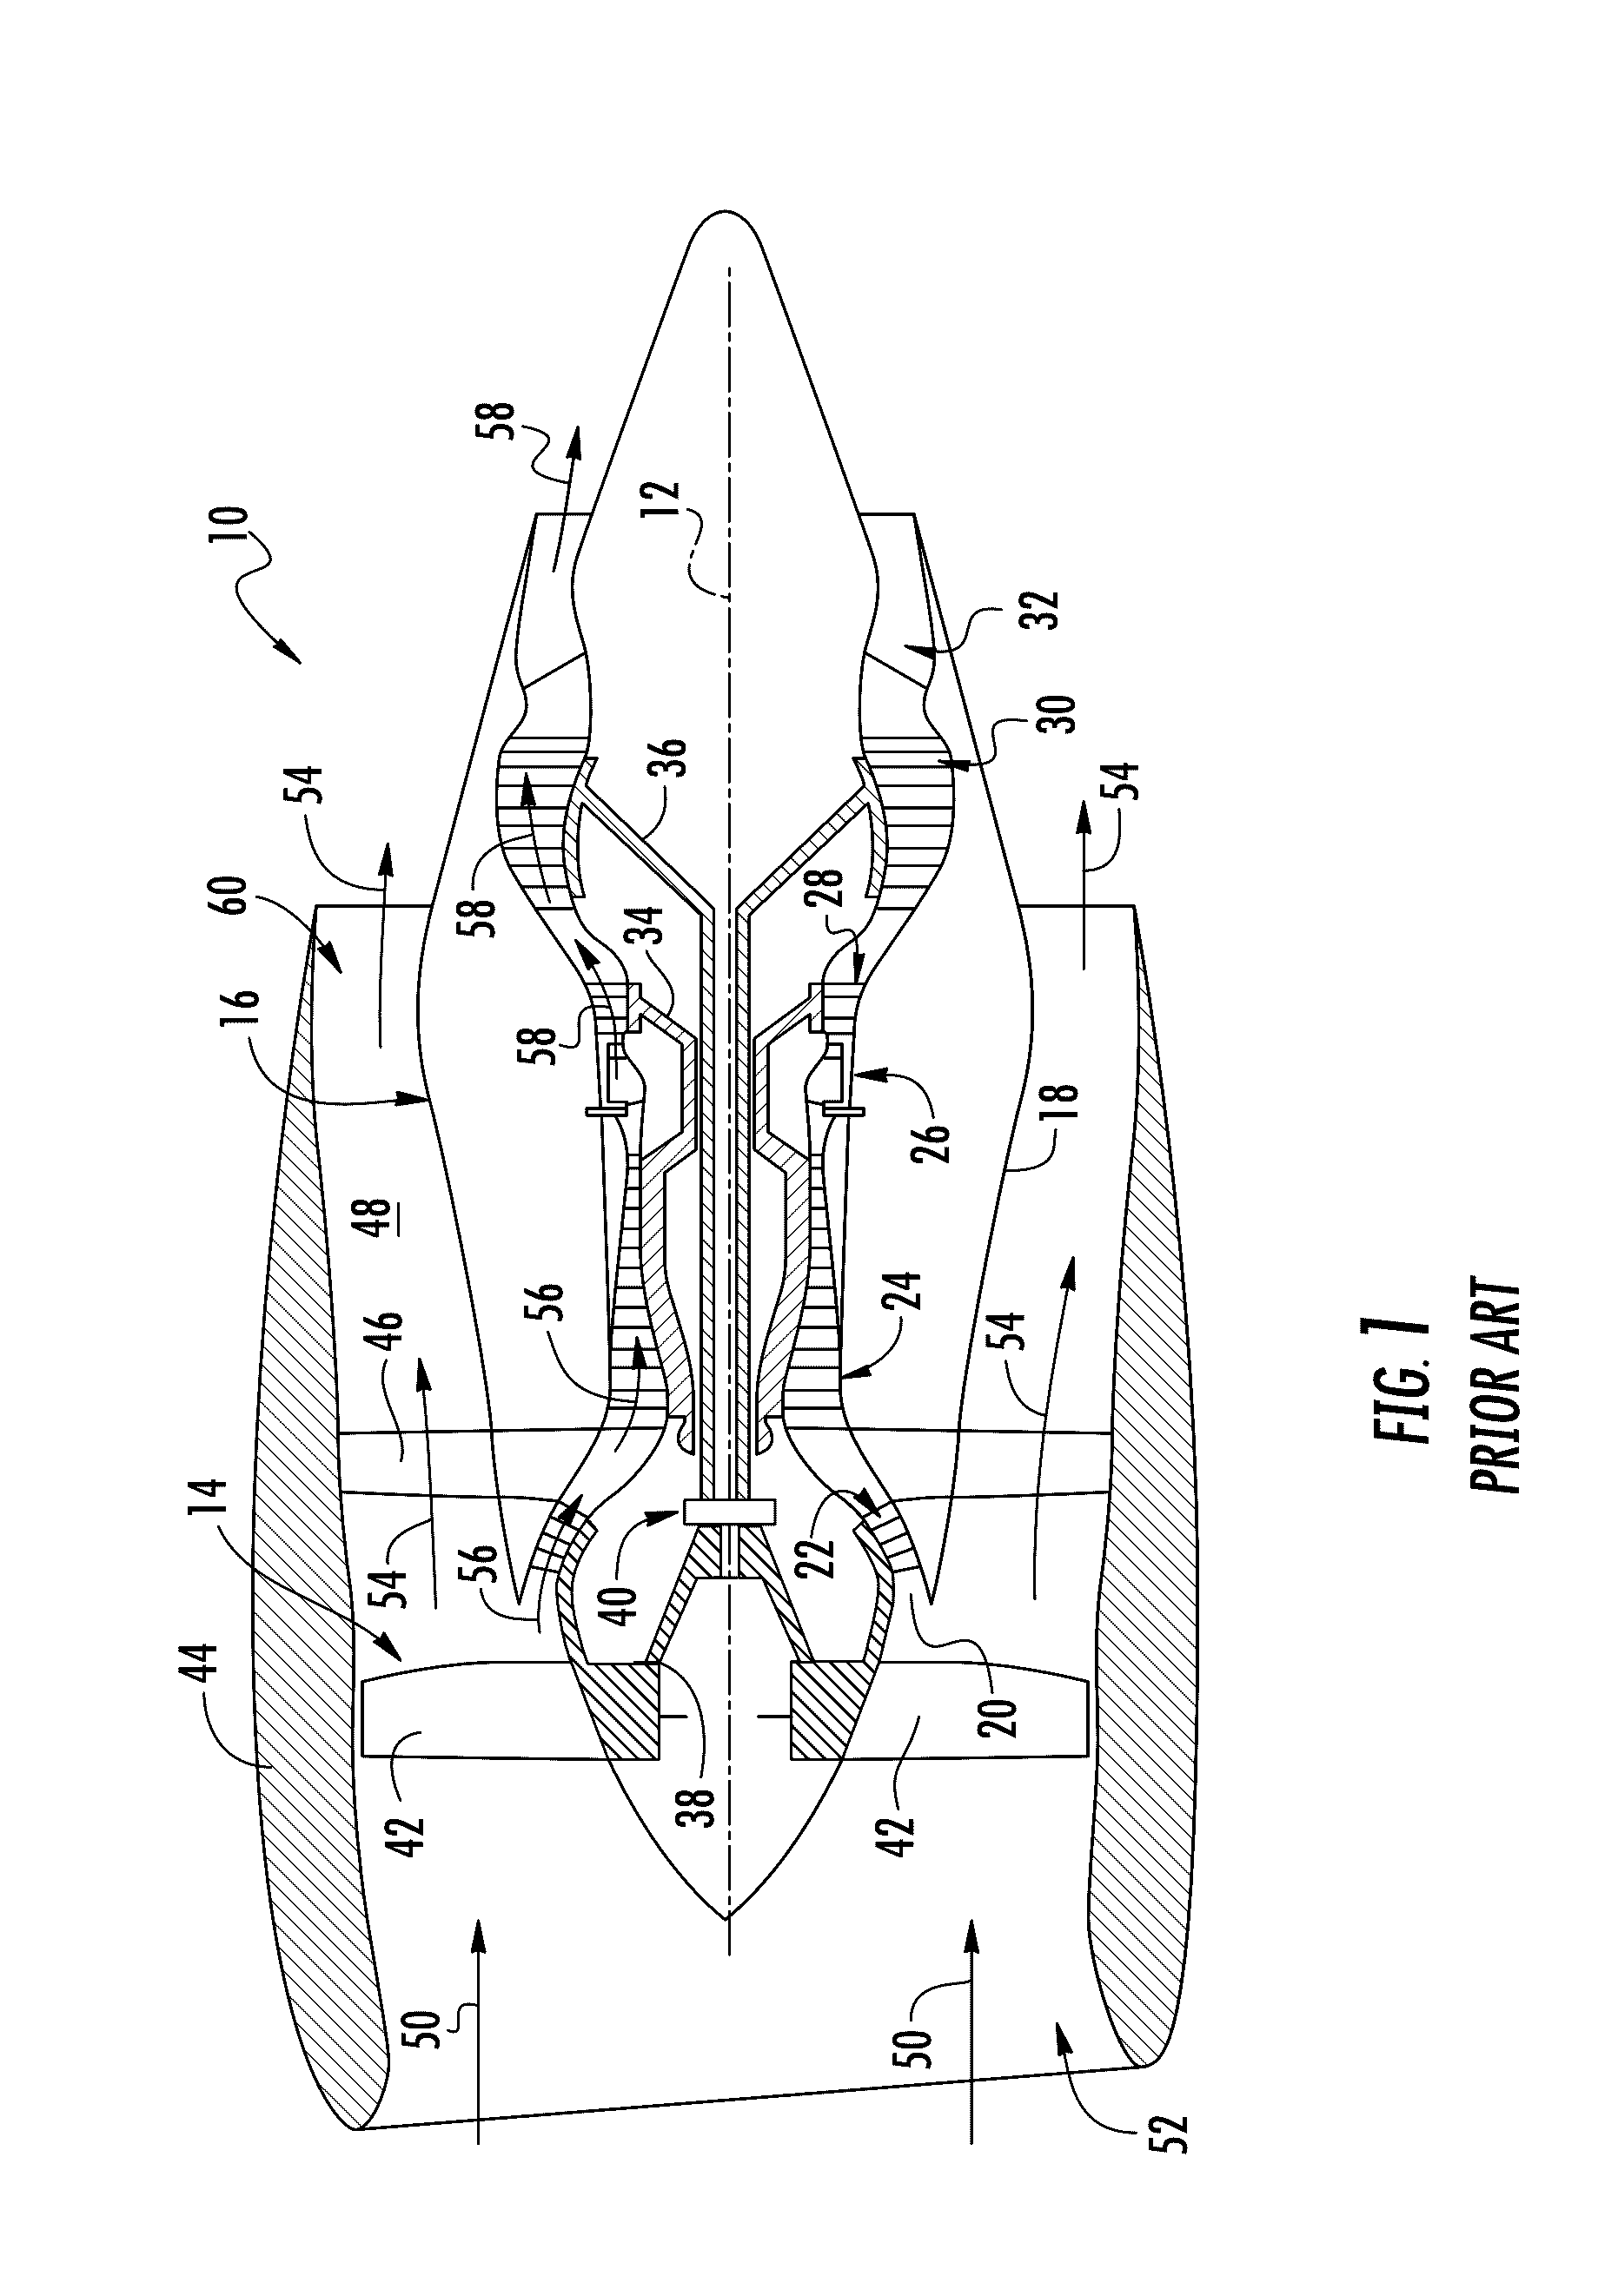 Igniter assembly for a gas turbine engine